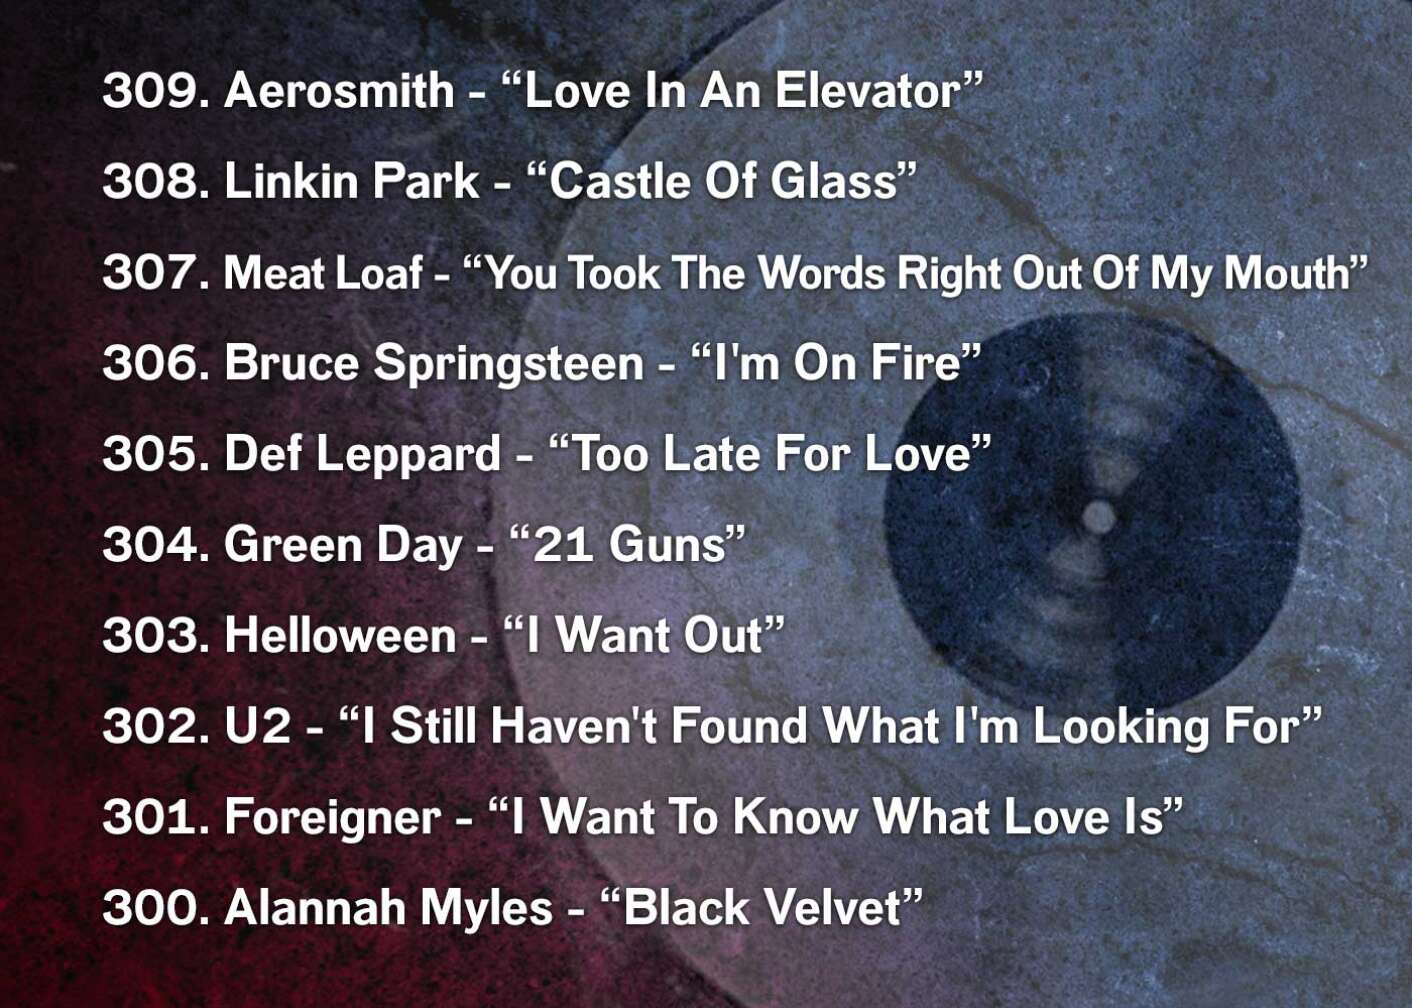 309. Aerosmith - “Love In An Elevator” 308. Linkin Park - “Castle Of Glass” 307. Meat Loaf - “You Took The Words Right Out Of My Mouth” 306. Bruce Springsteen - “I'm On Fire” 305. Def Leppard - “Too Late For Love” 304. Green Day - “21 Guns” 303. Helloween - “I Want Out” 302. U2 - “I Still Haven't Found What I'm Looking For” 301. Foreigner - “I Want To Know What Love Is” 300. Alannah Myles - “Black Velvet”